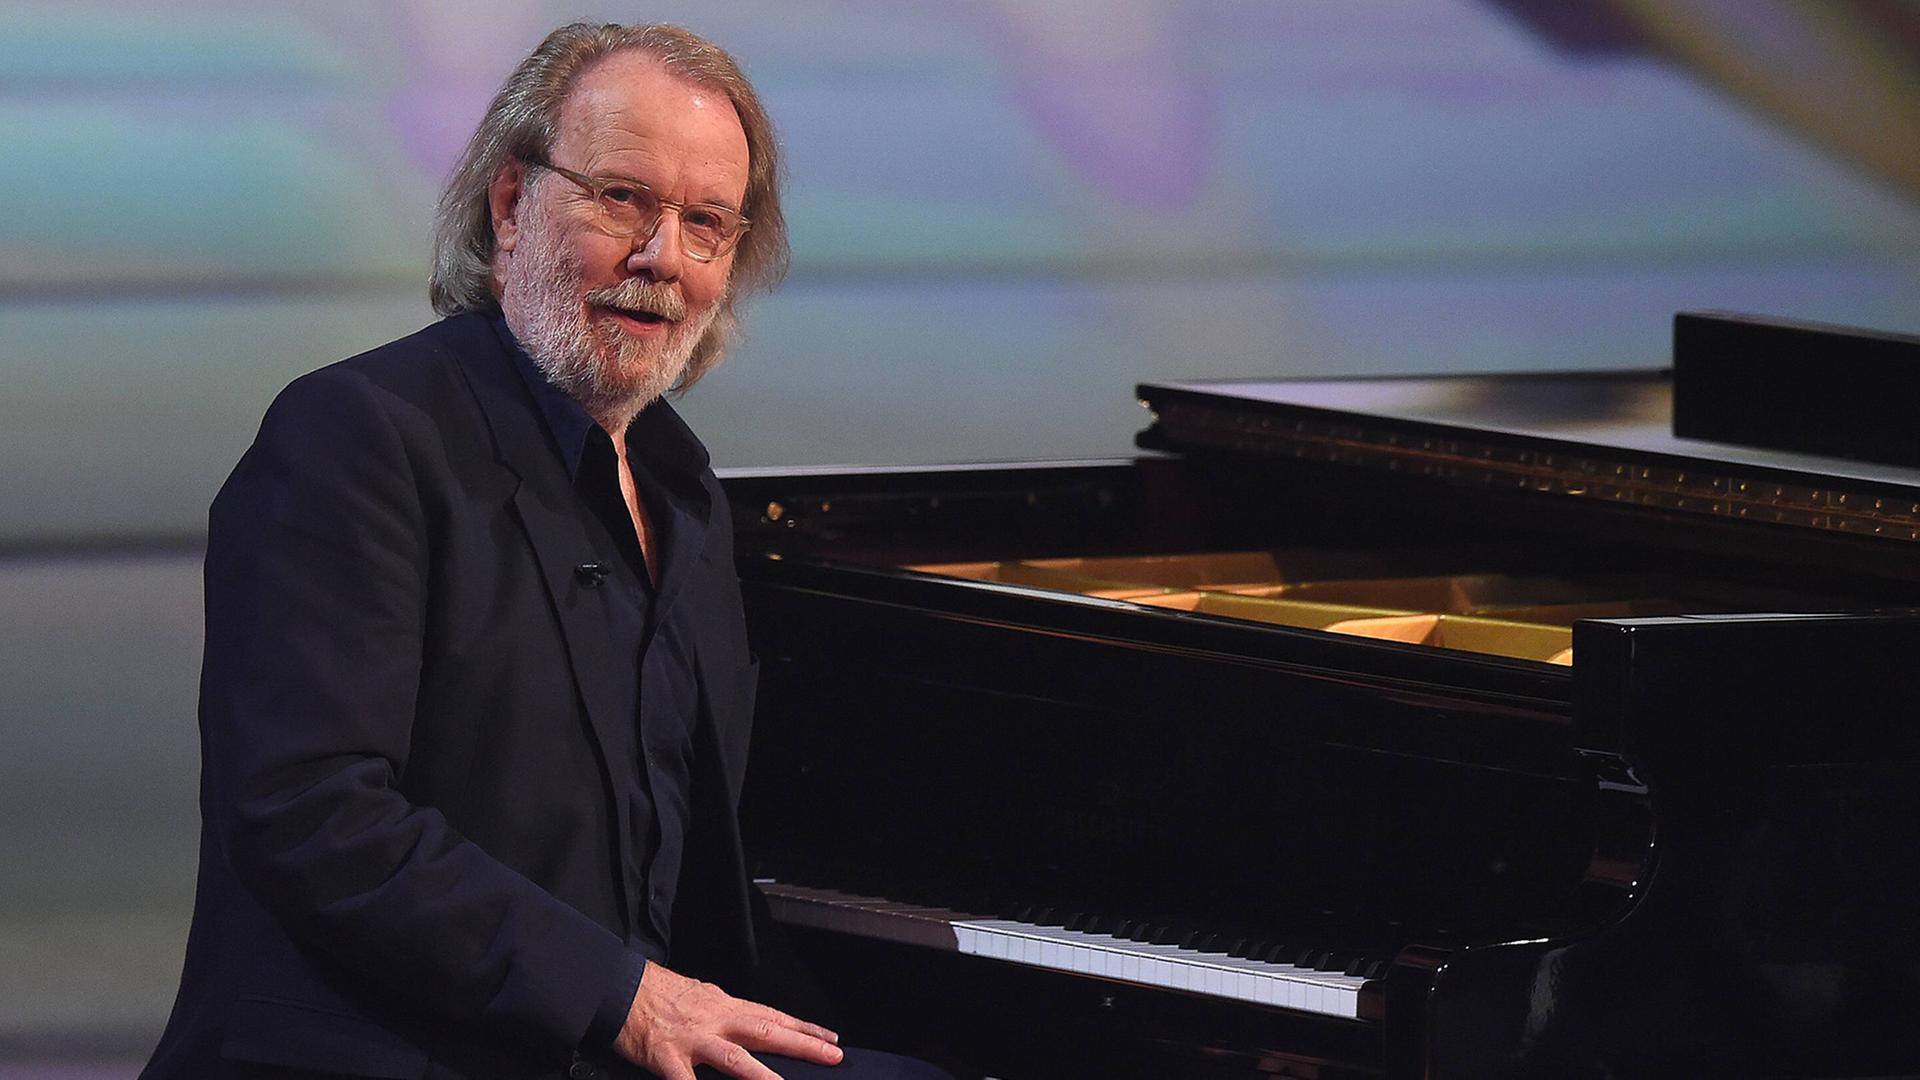 Abba-Musiker Benny Andersson